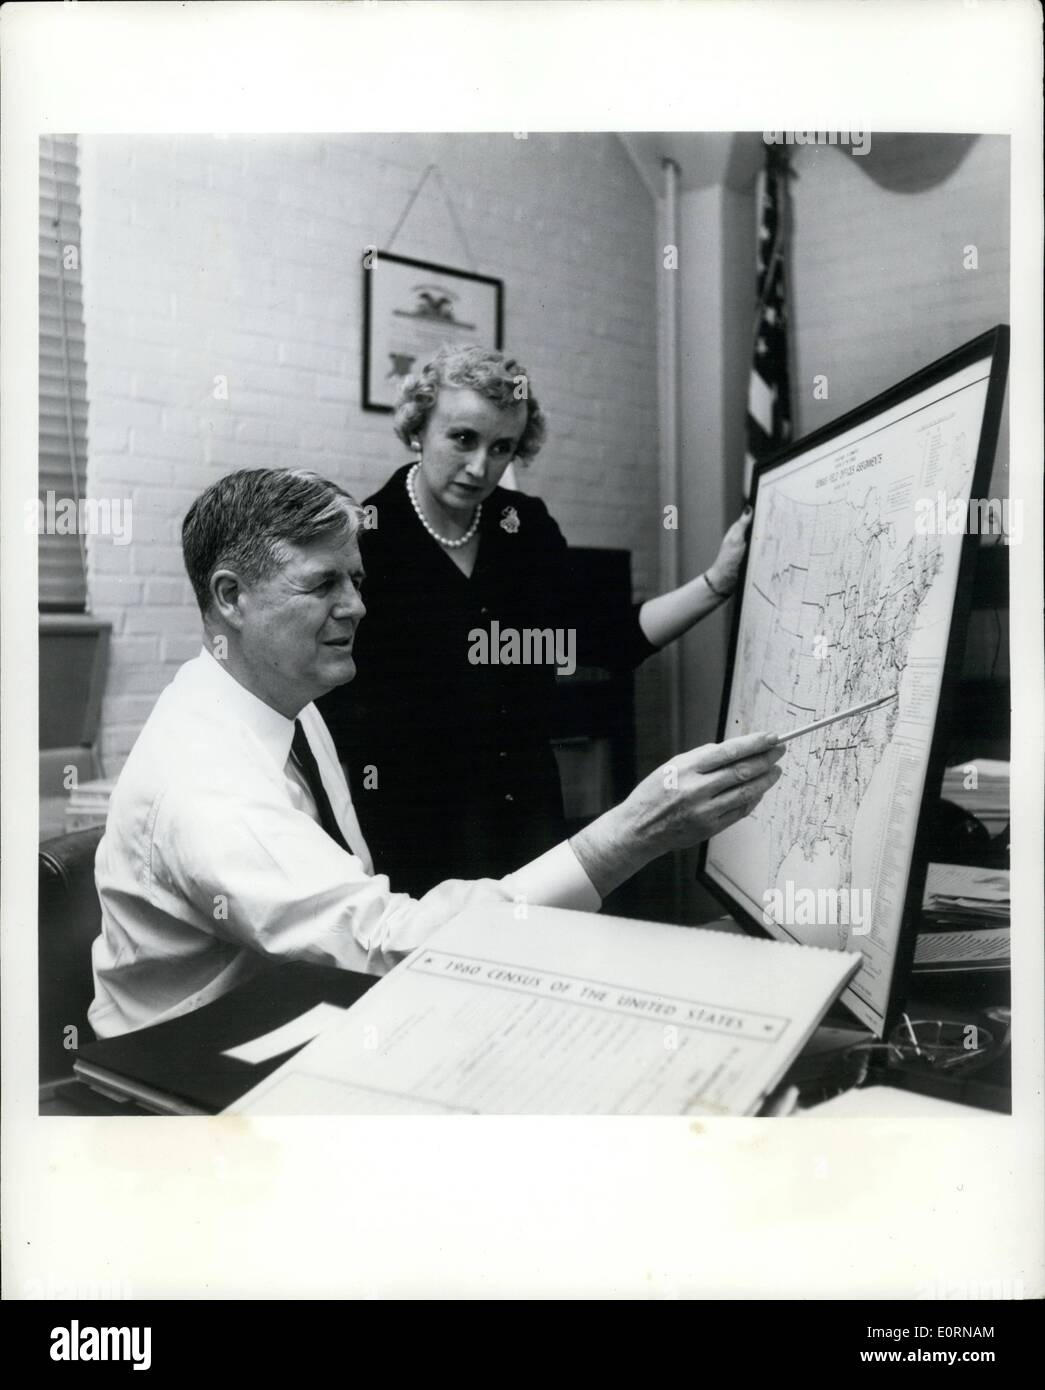 Mar. 03, 1960 - Picture Feature - The 1960 Federal Census Dr. Robert W. Burgess, Director of the Bureau of The Census, point out on a map of the United States, the different areas which will be covered by some 160,000 enumerators starting April 1. Miss Helen B. White, administrative officer to the Director looks on as they chart the assignments of the field offices through out the nation at the Census Bureau Headquarters in Suitland, Maryland. Stock Photo